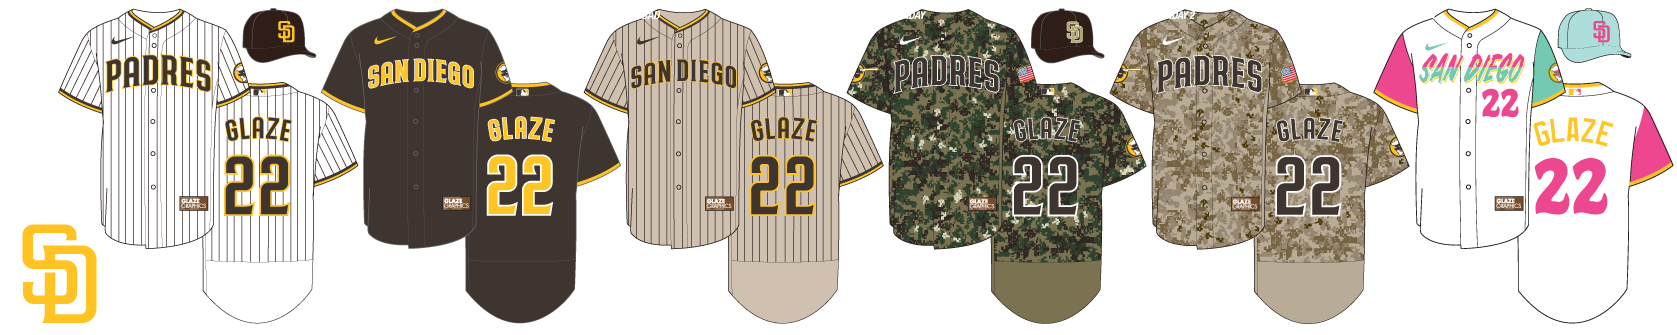 Padres Swagg Chain: The story behind the bling and why we should